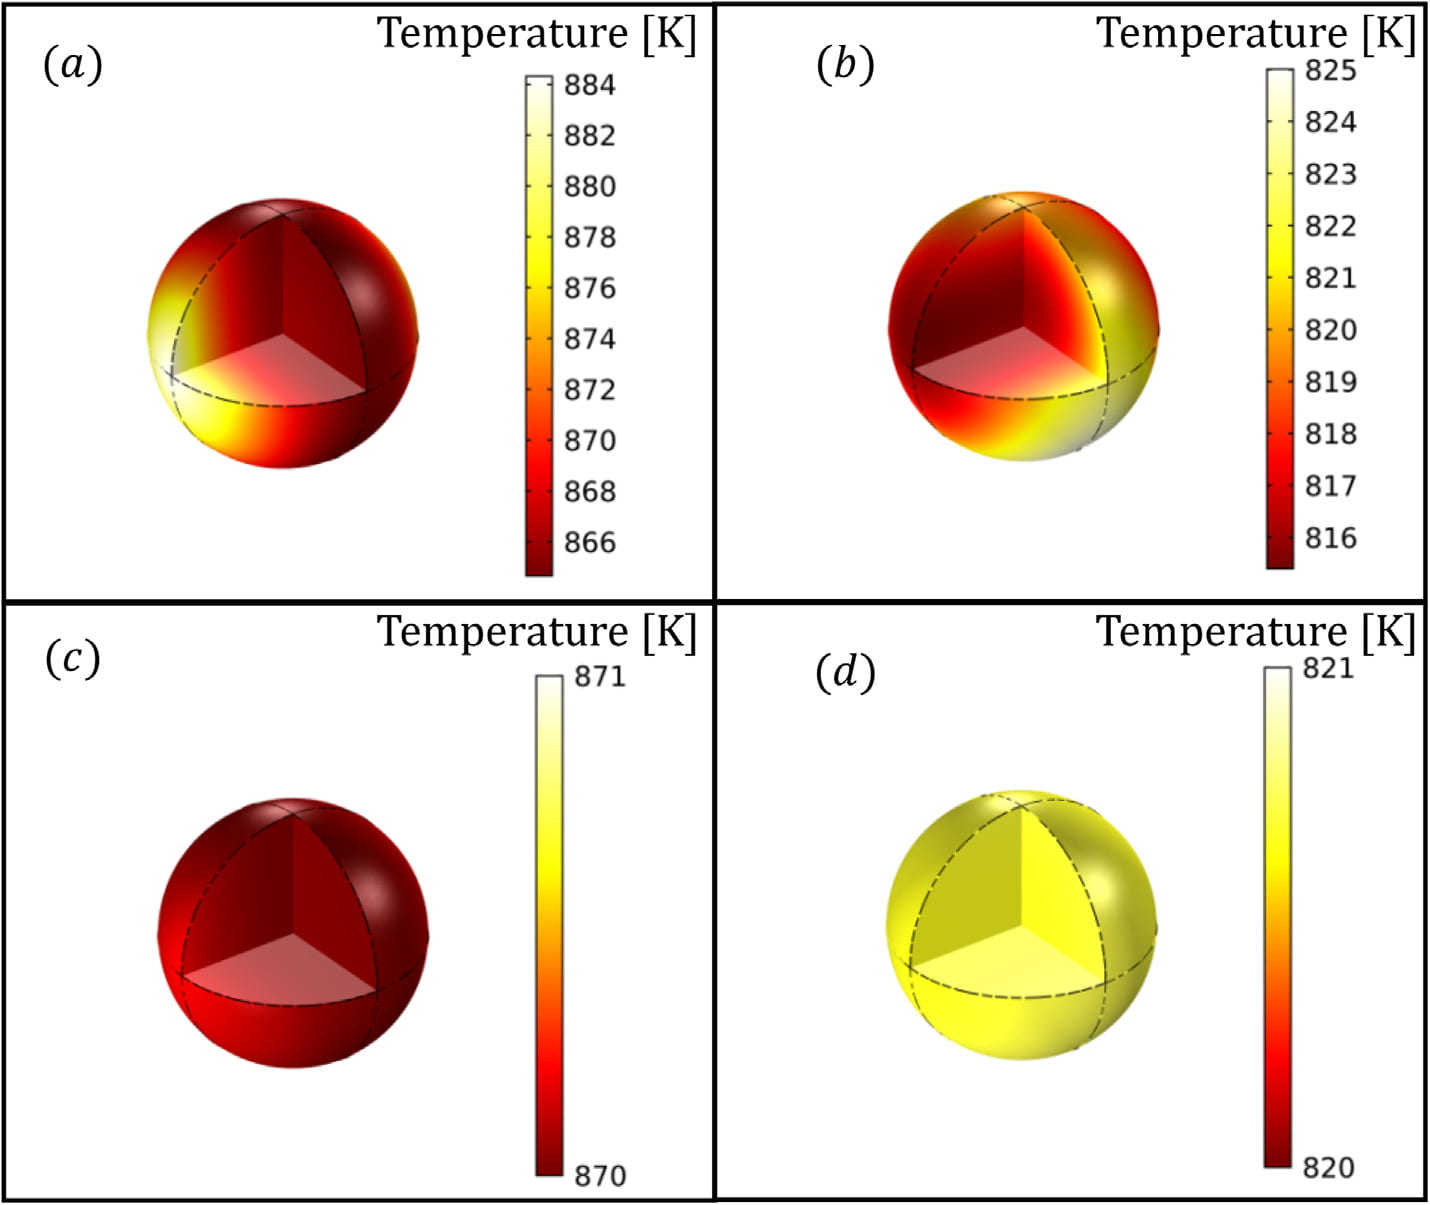 Intra-particle temperature profiles obtained from the detailed simulations of microwave-heating of spherical particles.